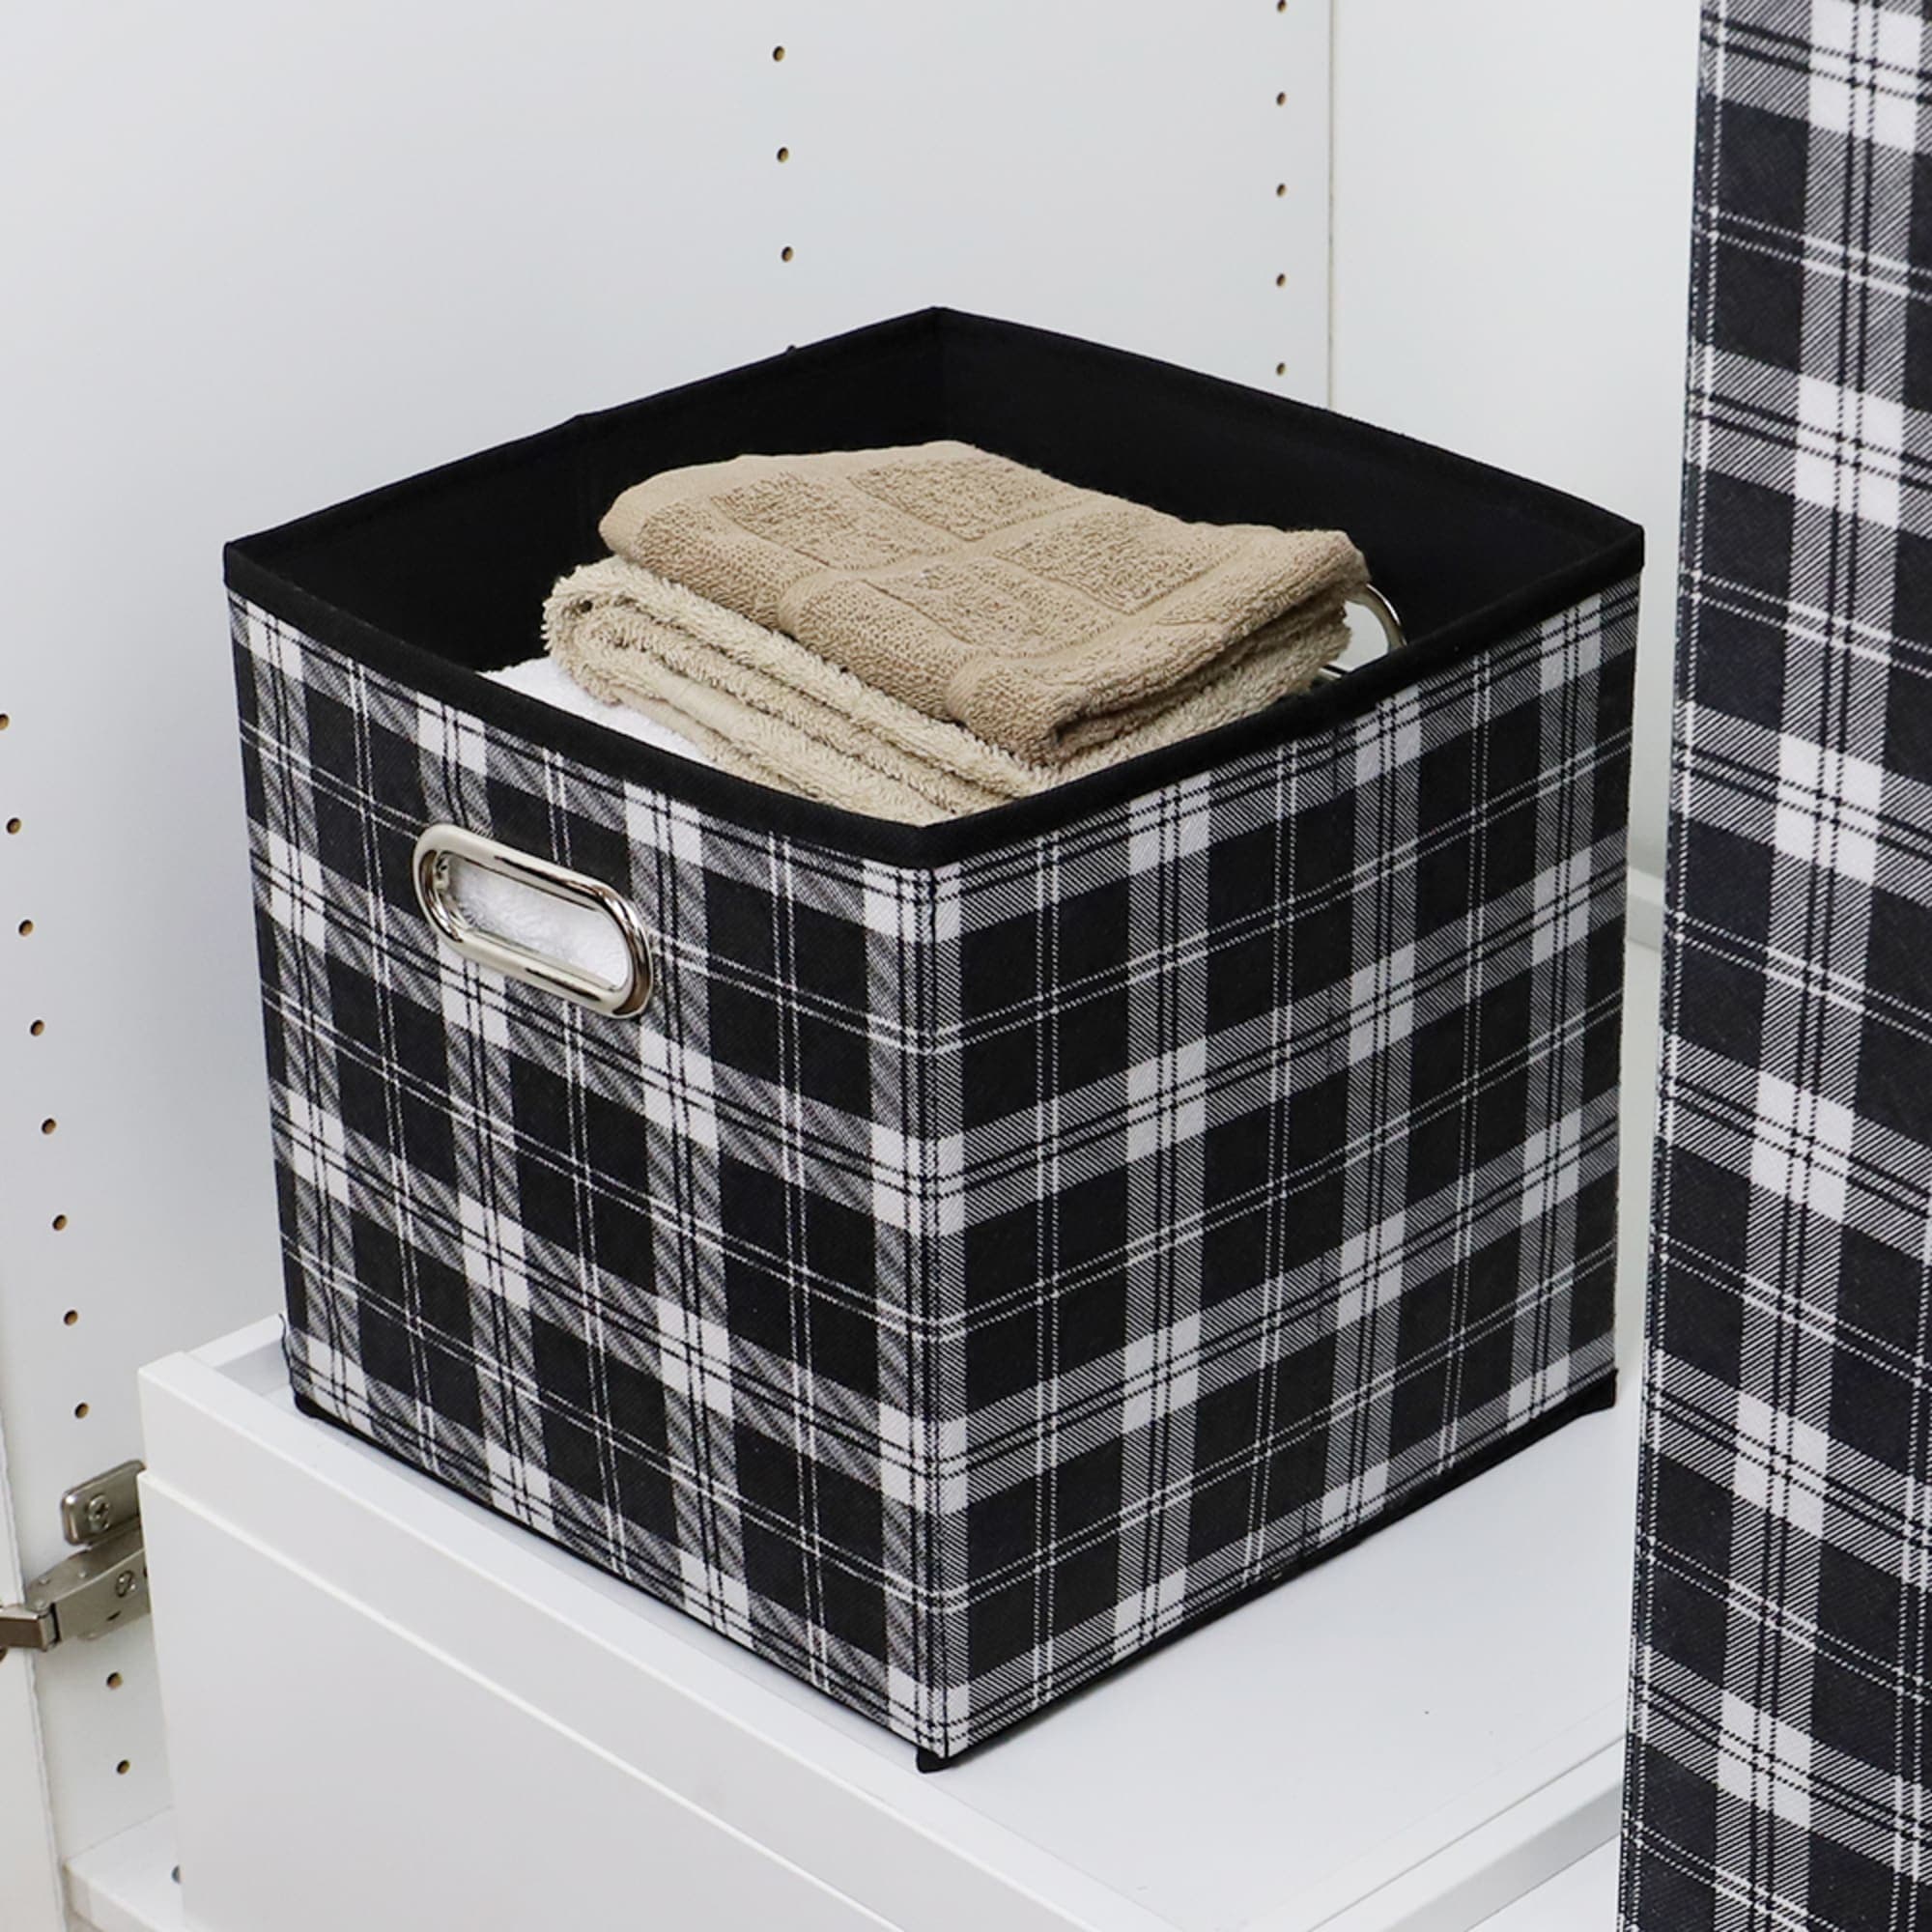 Home Basics Plaid Non-Woven Storage Bin with Grommet Handle, Black $4.00 EACH, CASE PACK OF 12